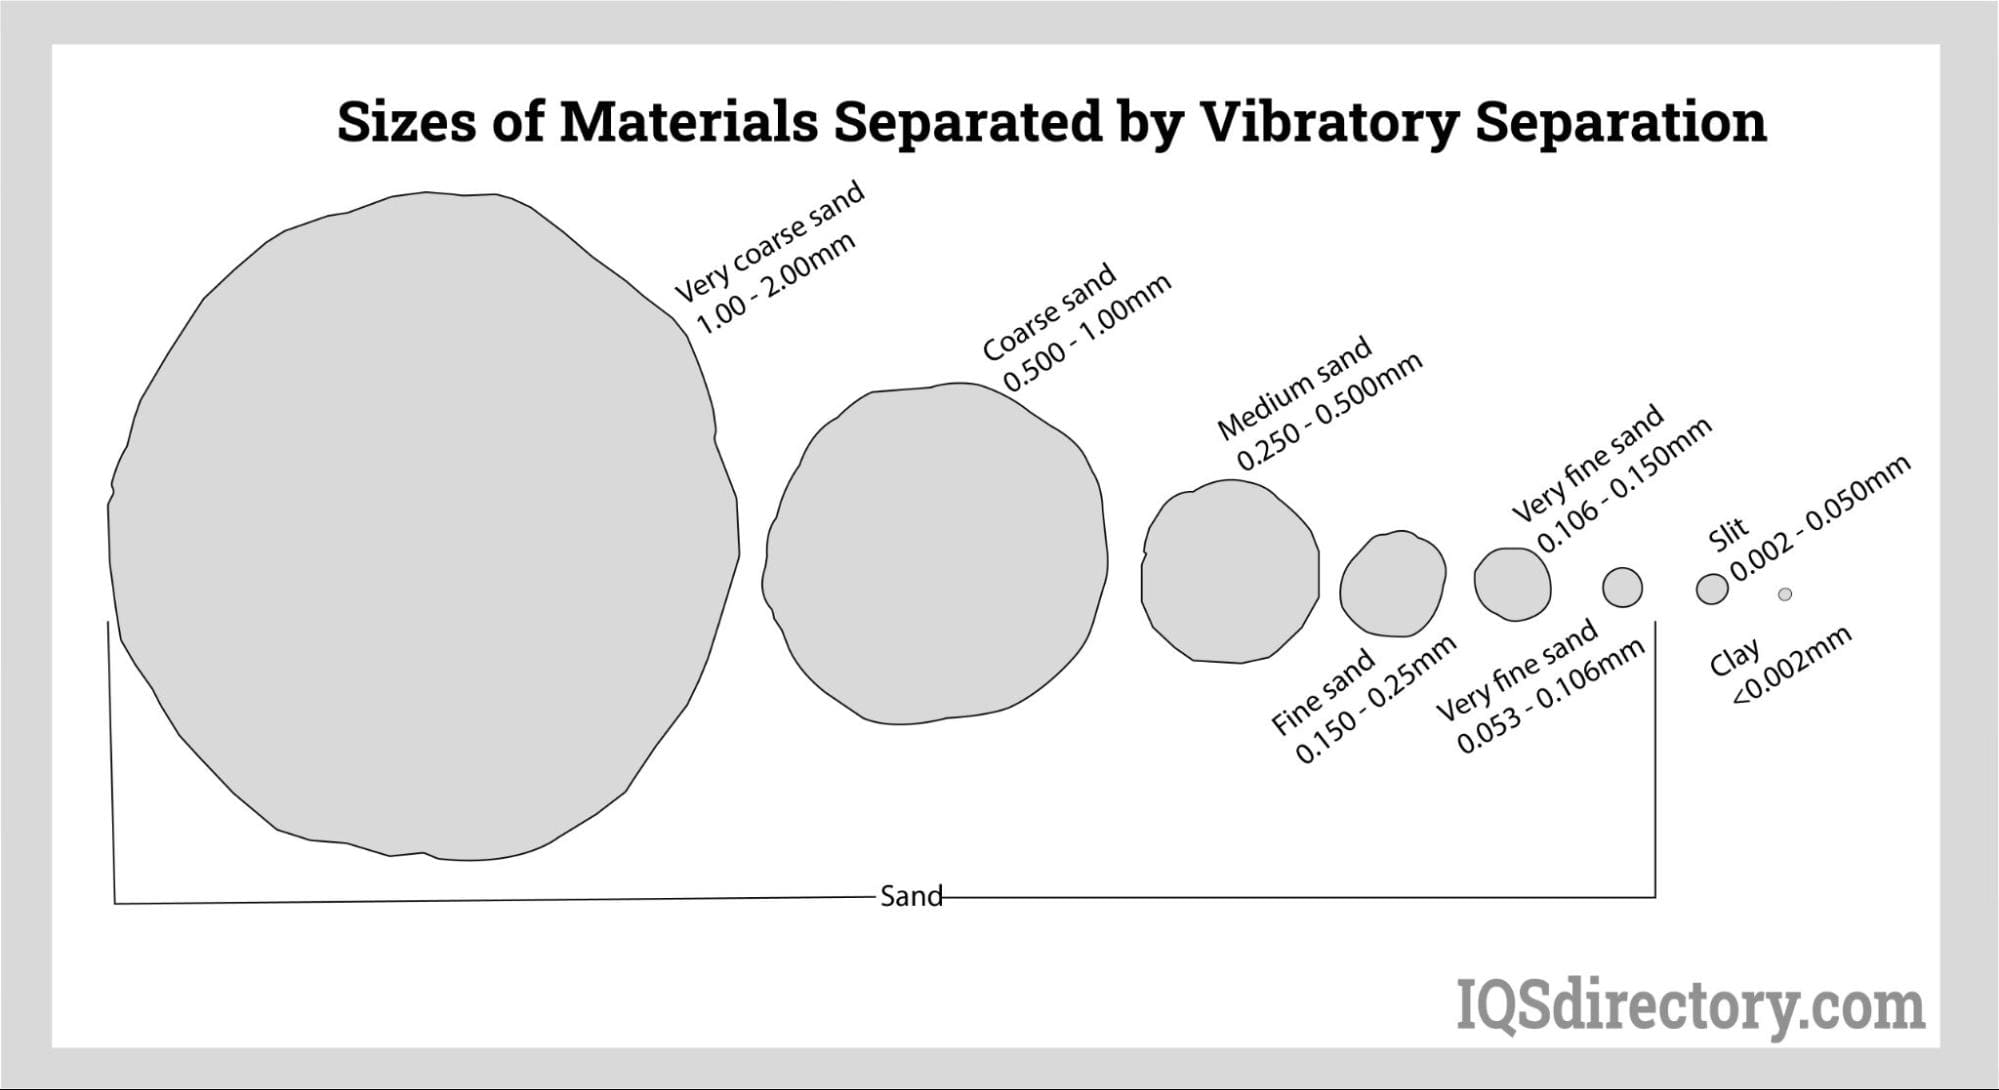 Sizes of Materials Separated by Vibratory Separation